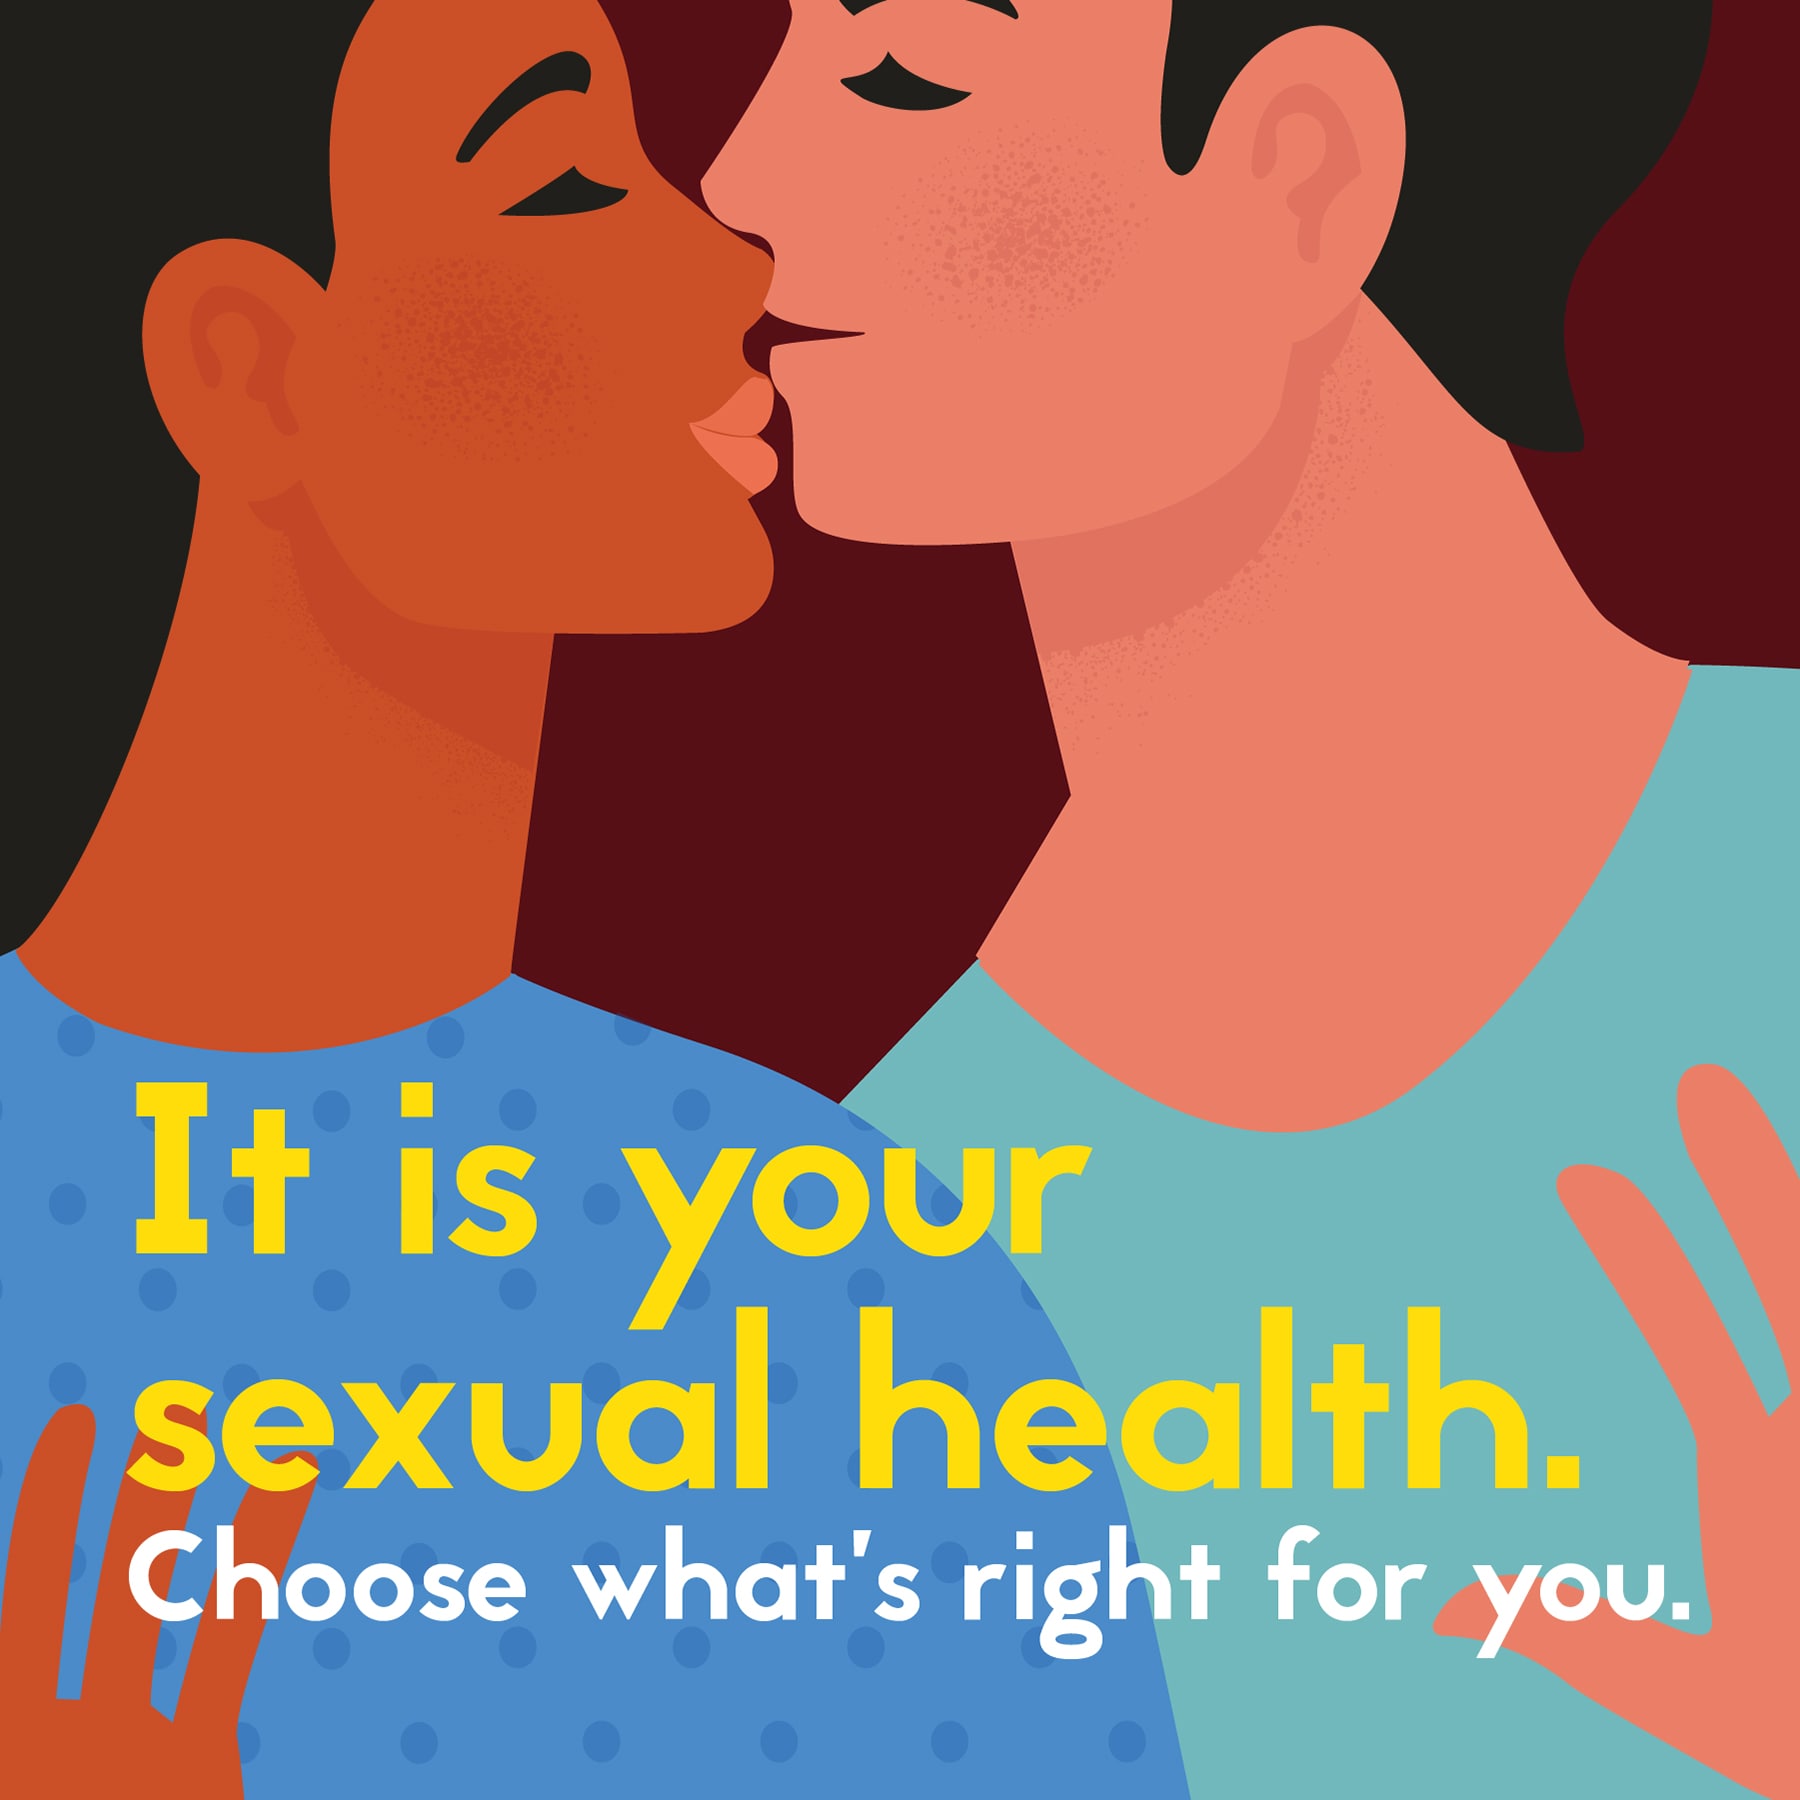 it's your sexual health. Choose what's right for you.